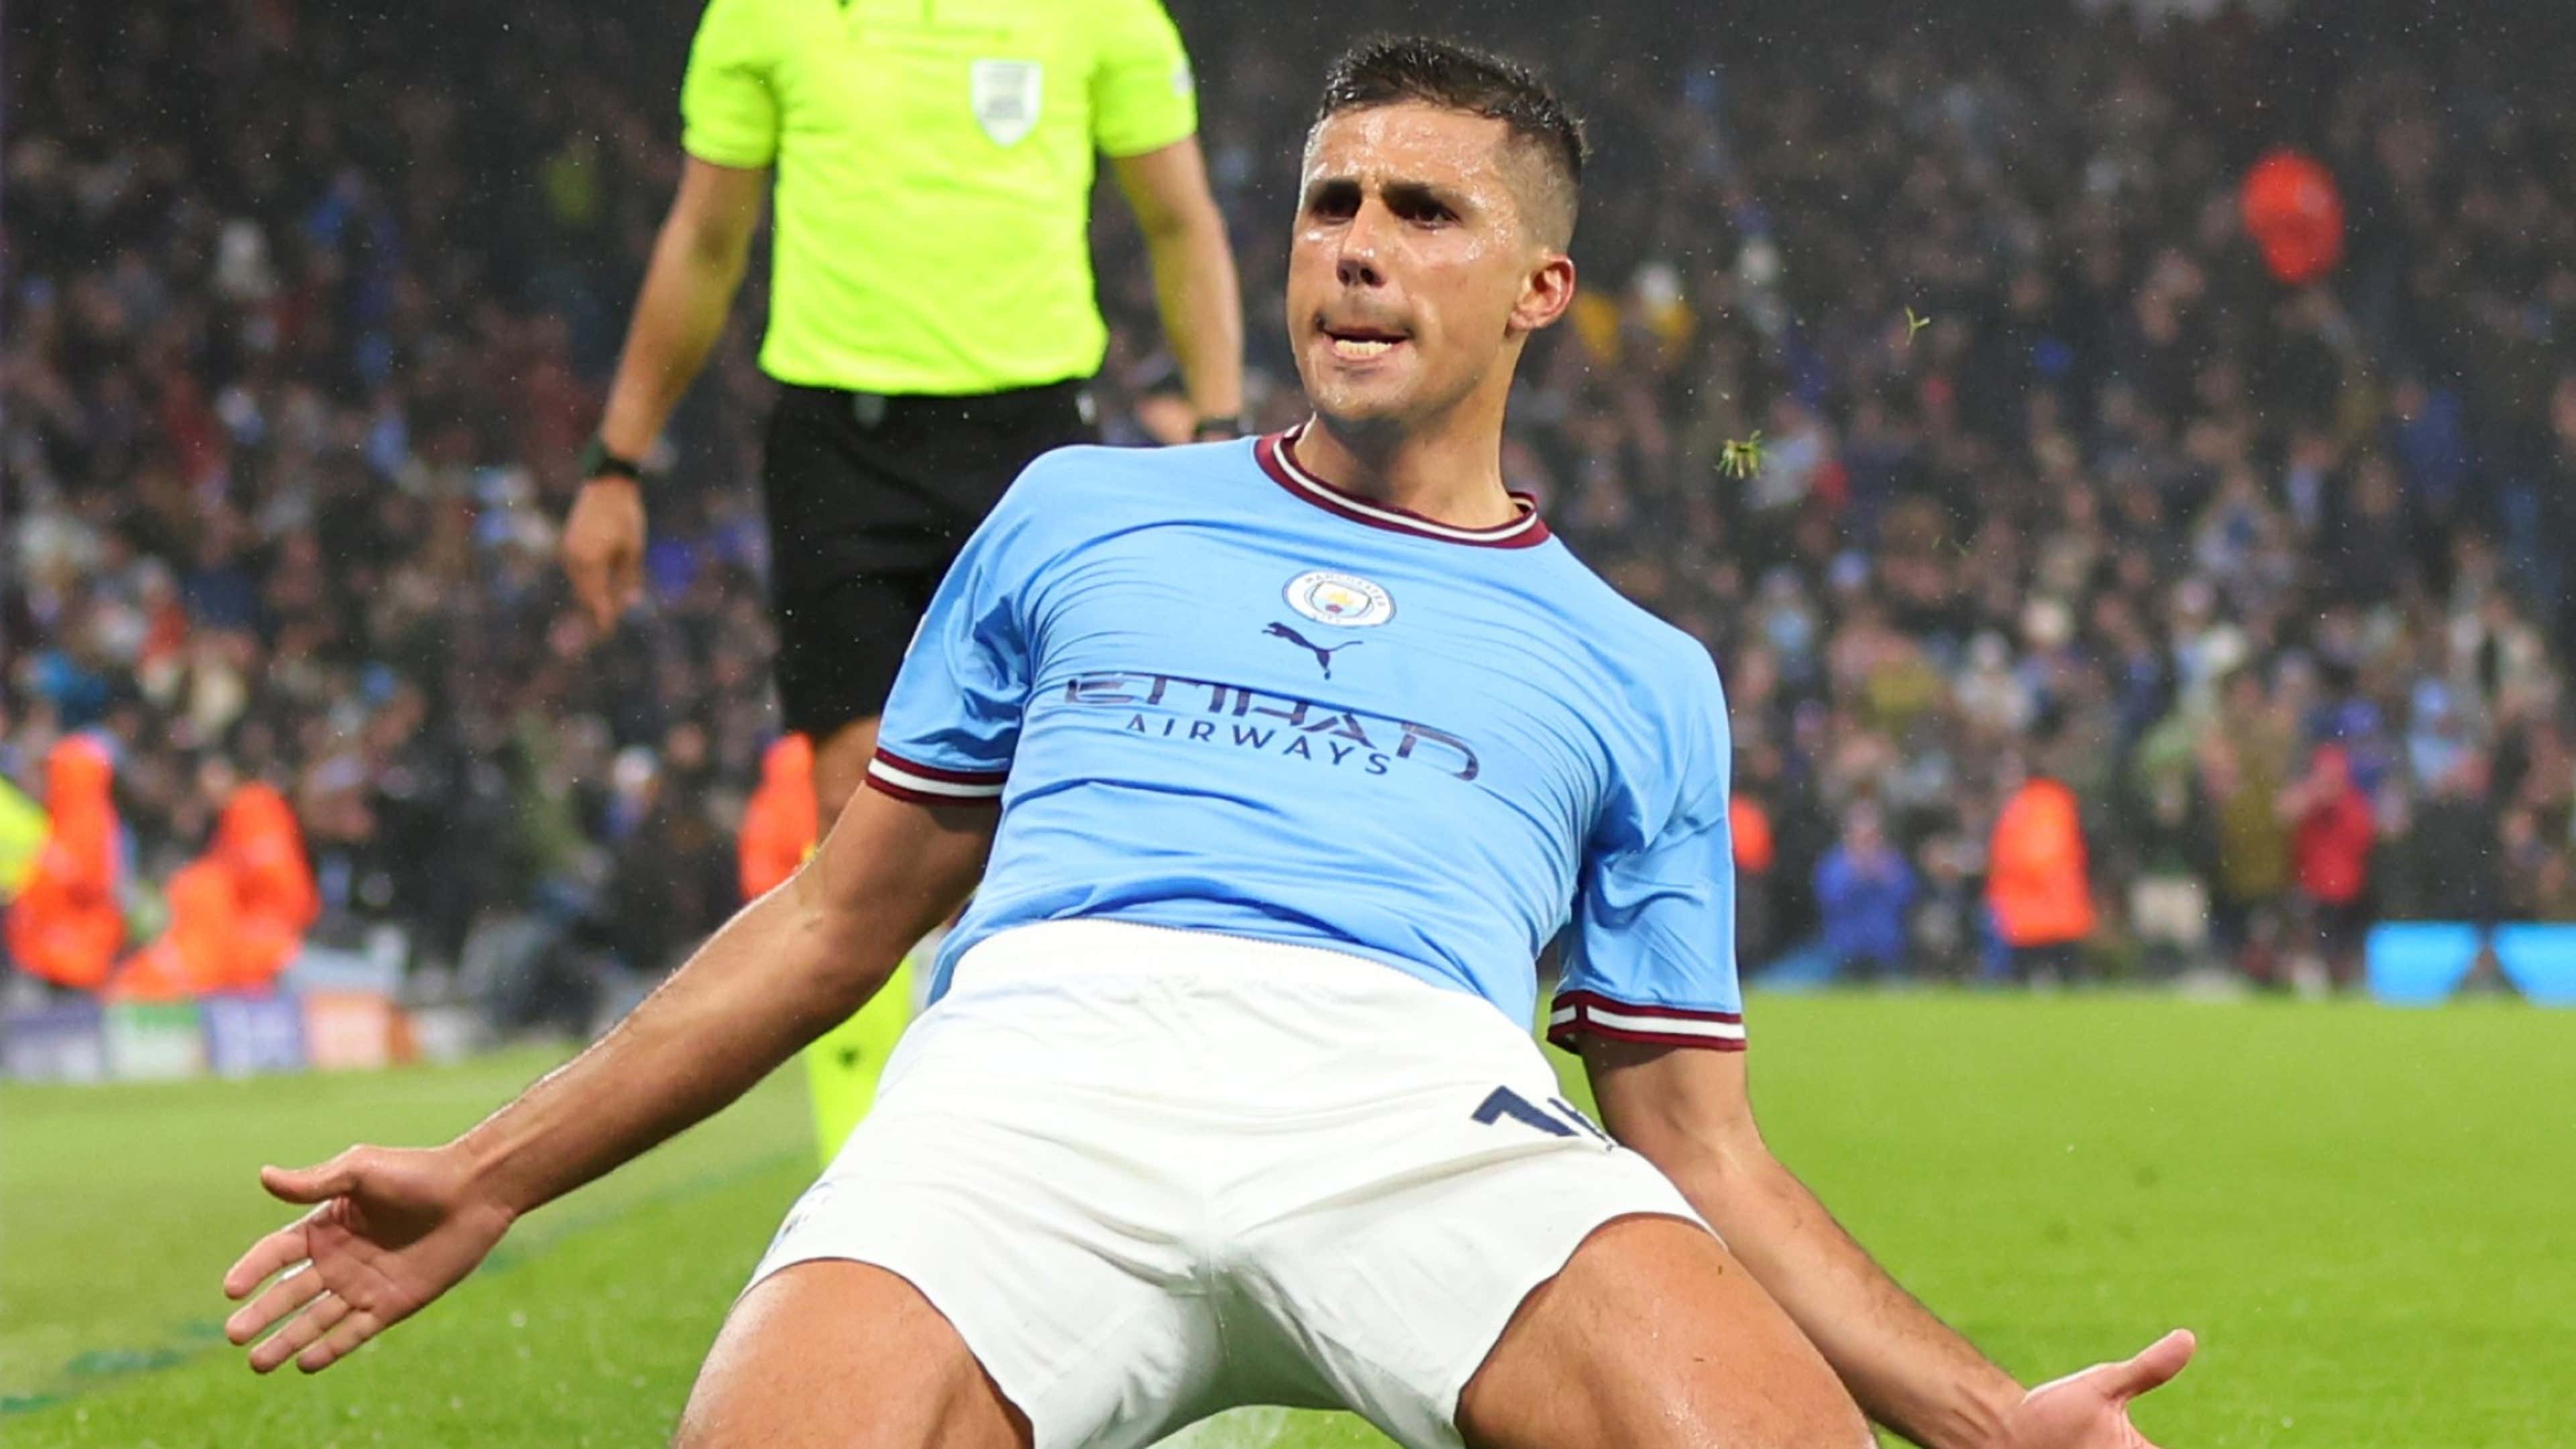 Man City player tipped for Ballon D'Or